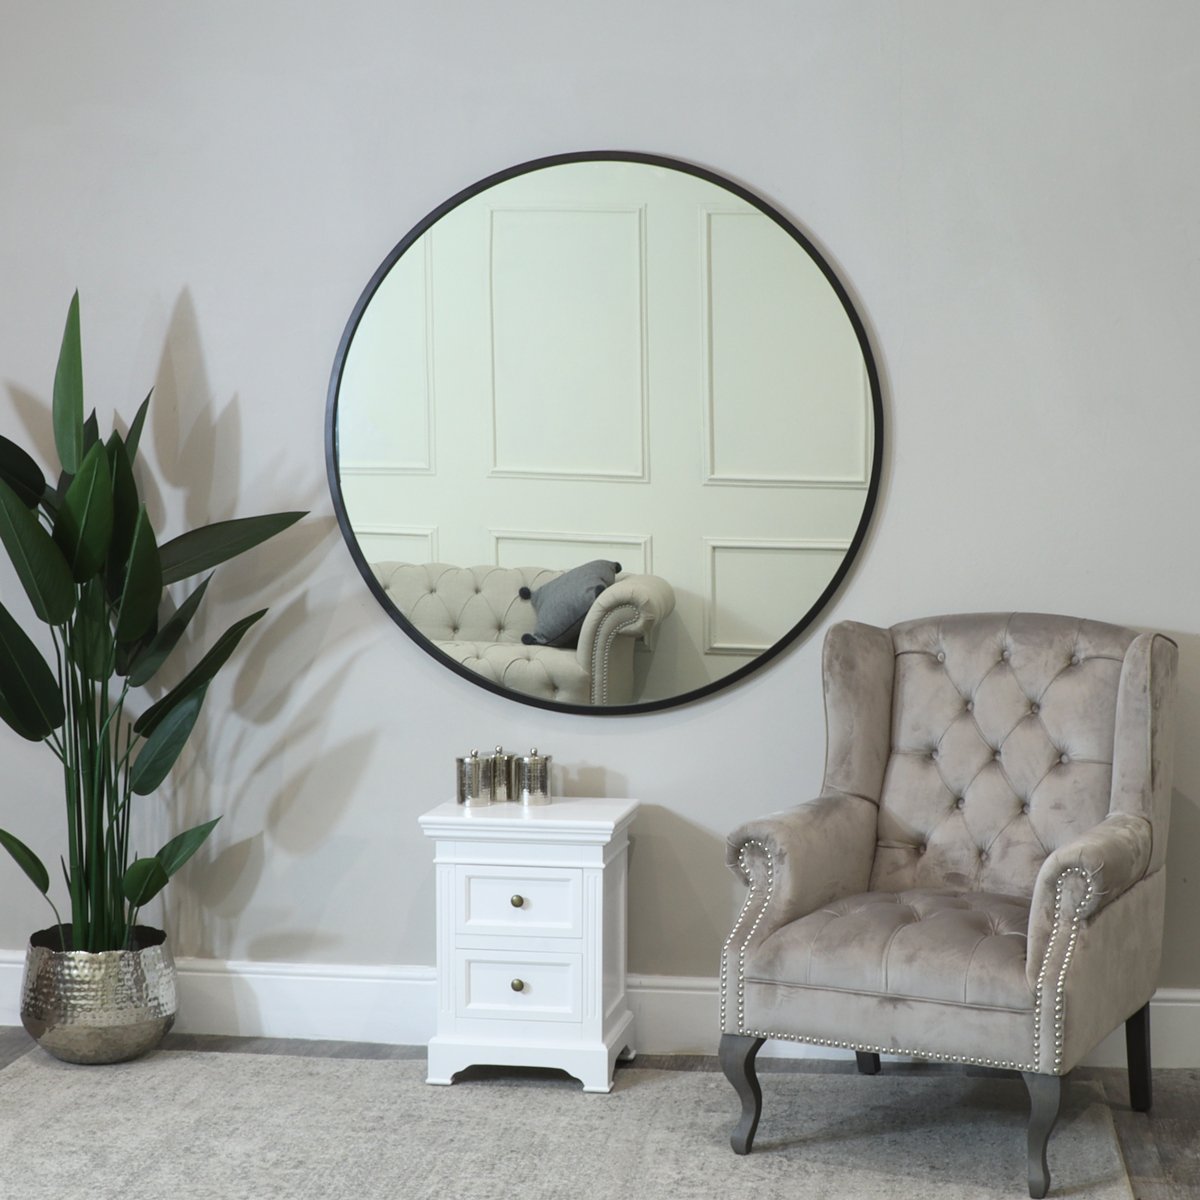 https://files.melodymaison.co.uk/images/P/extra-large-round-black-wall-mirror-120cm-x-120cm_MM28792-01.jpg